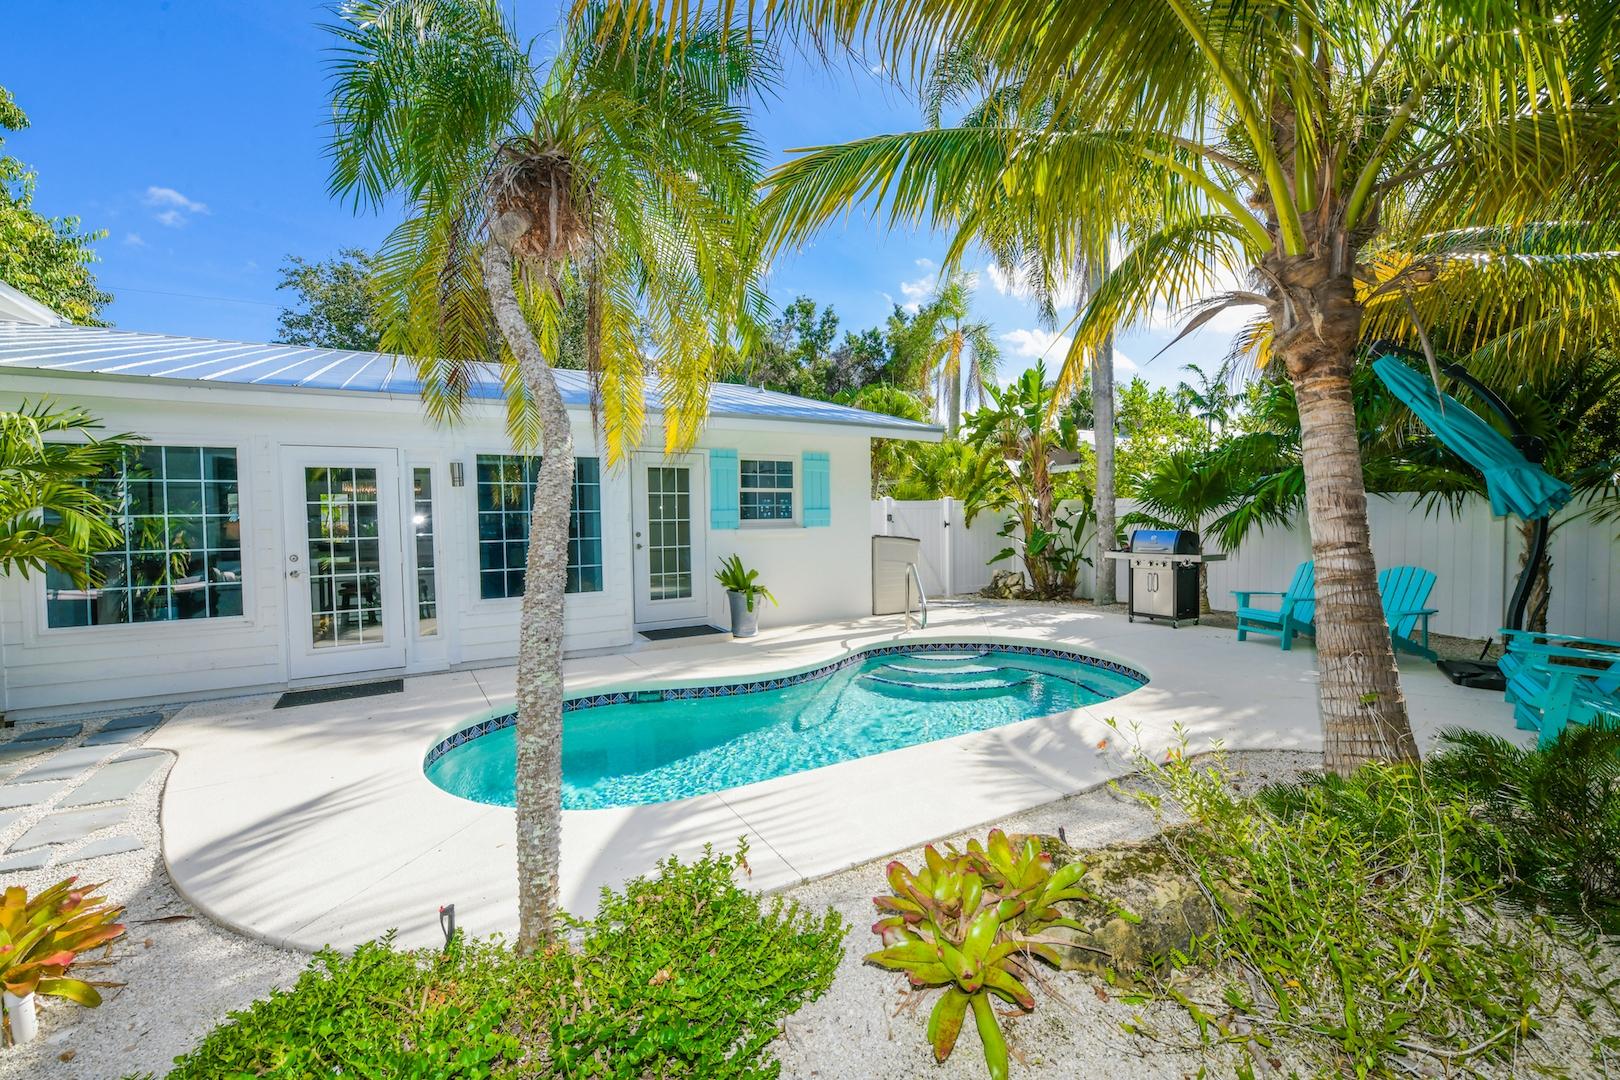 Property Image 1 - A Wave From It All - New Luxury Renovated Home! Heated Pool, Cabana, Hammock, Walk to Beach